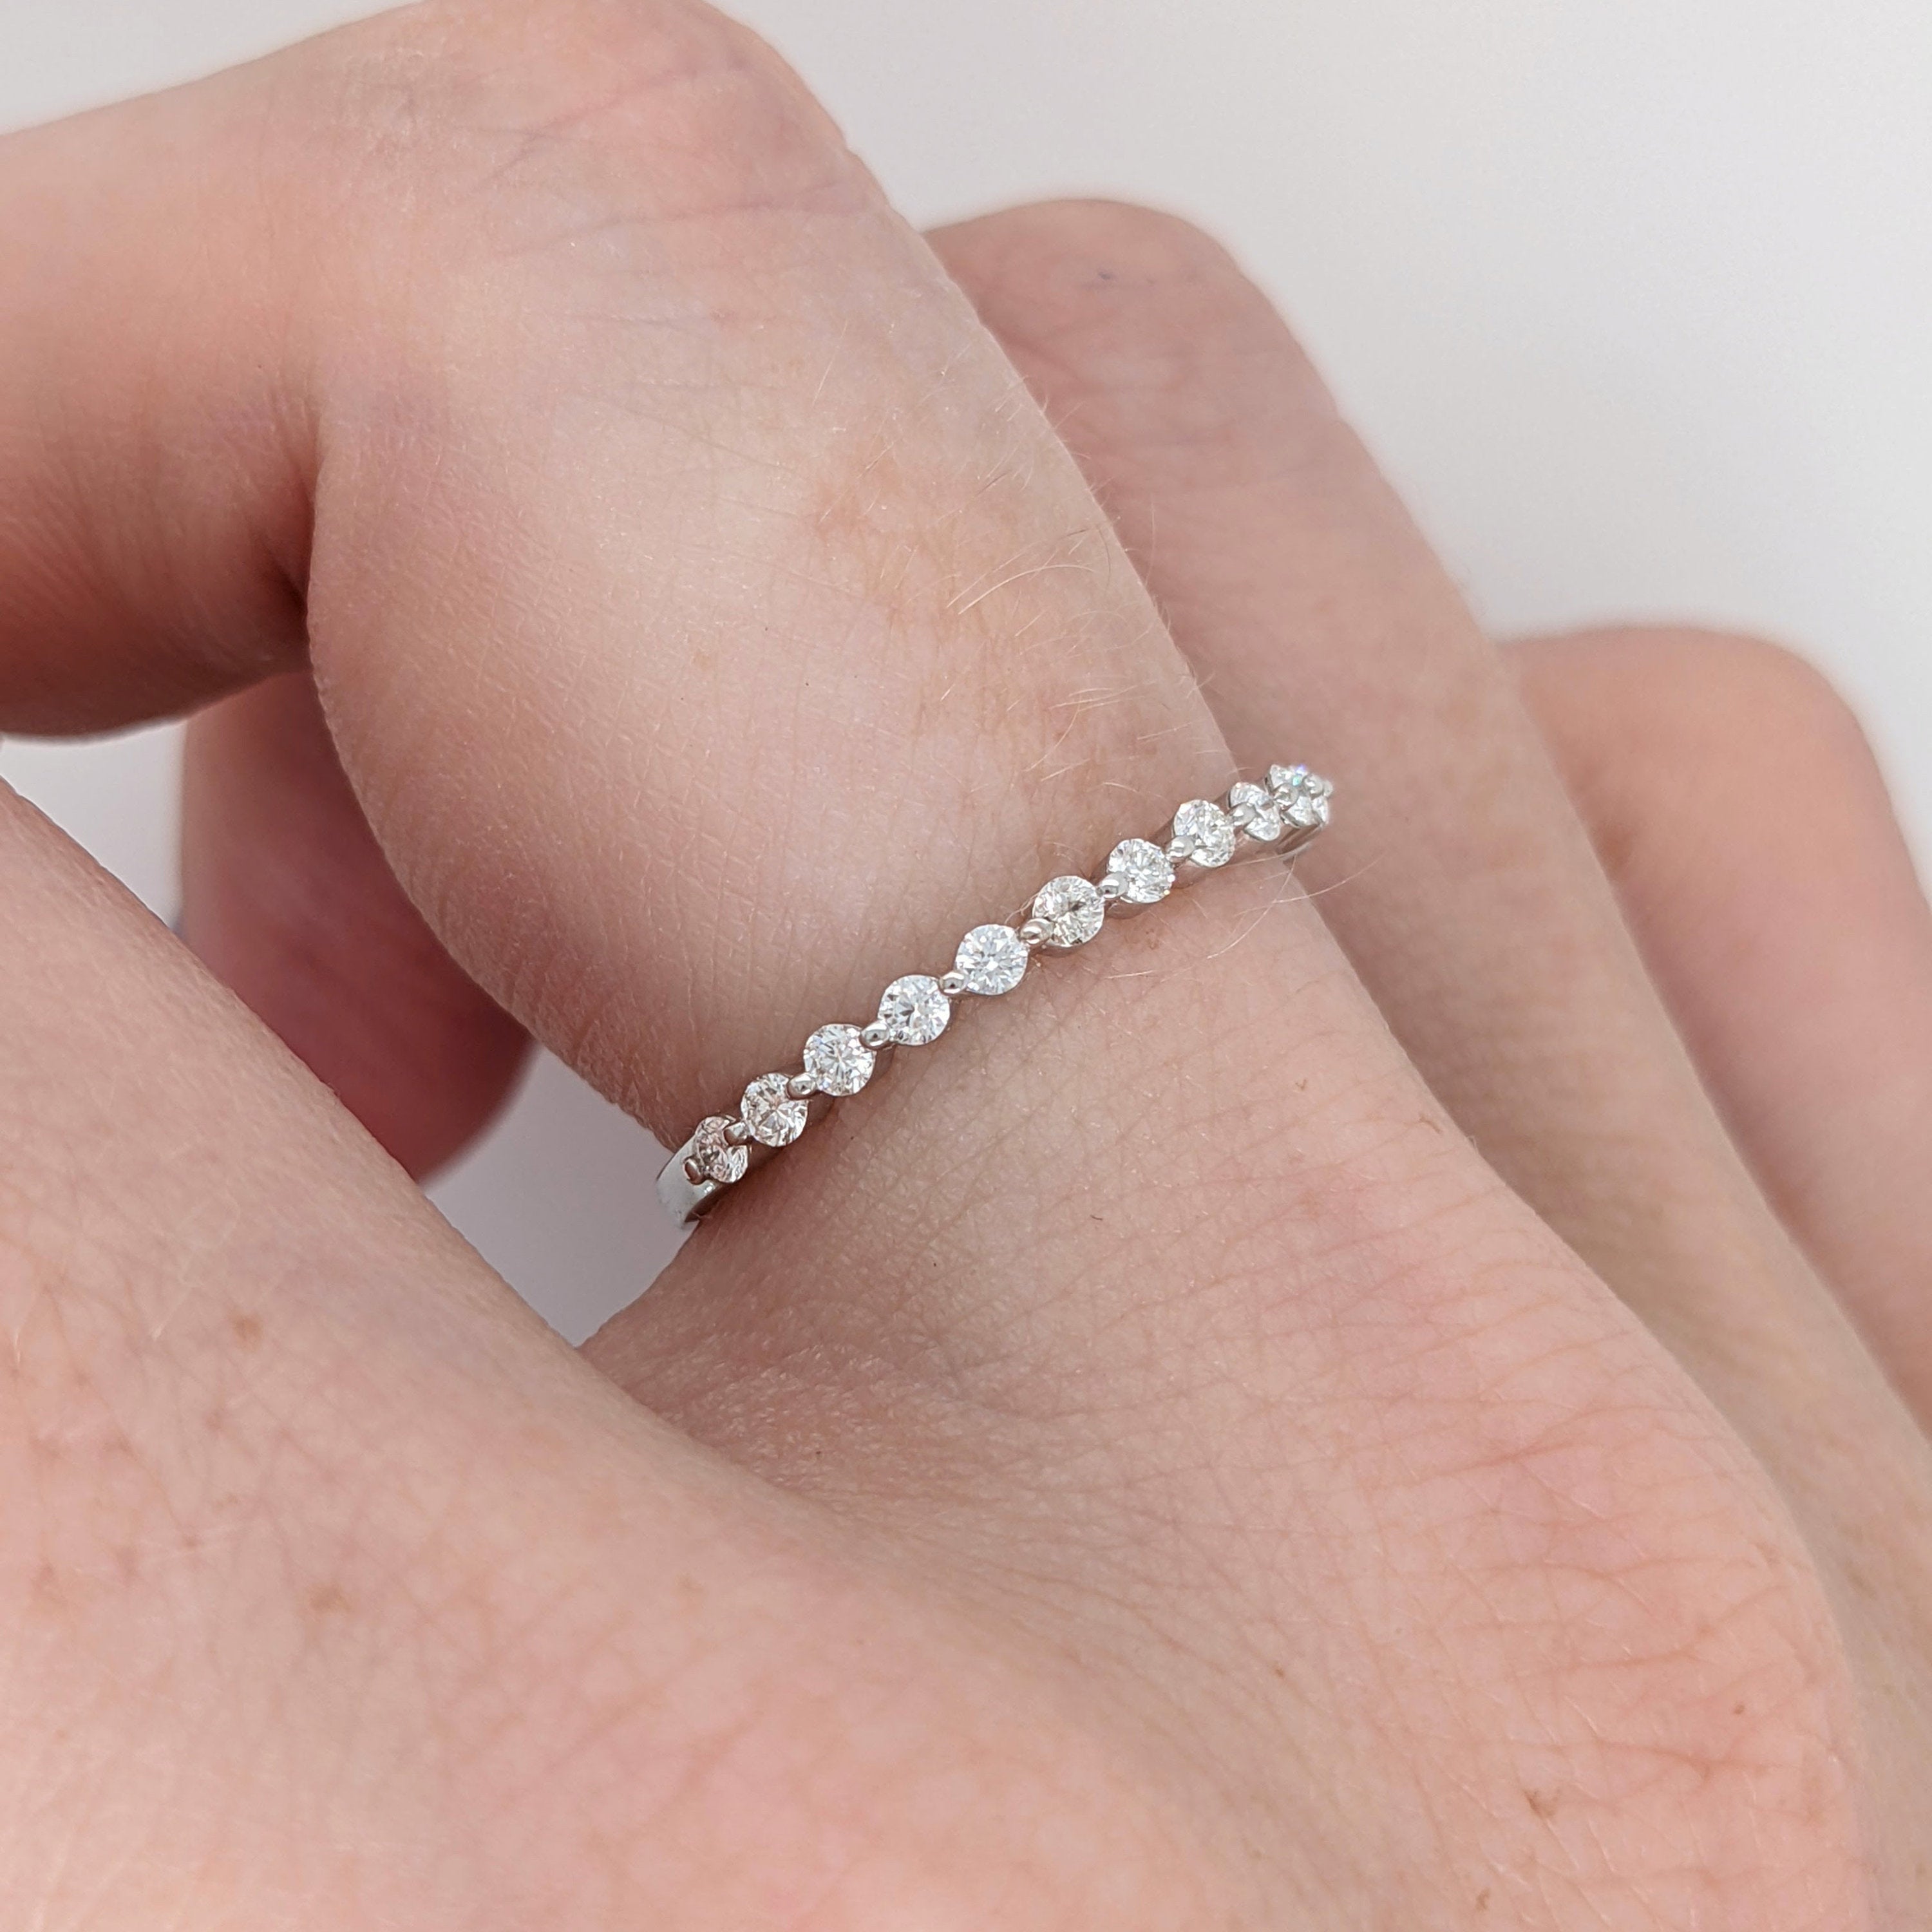 Diamond Eternity Band in Solid 14k White, Yellow, or Rose Gold and Natural SI GH Diamonds | Stackable Band | Wedding Anniversary Engagement